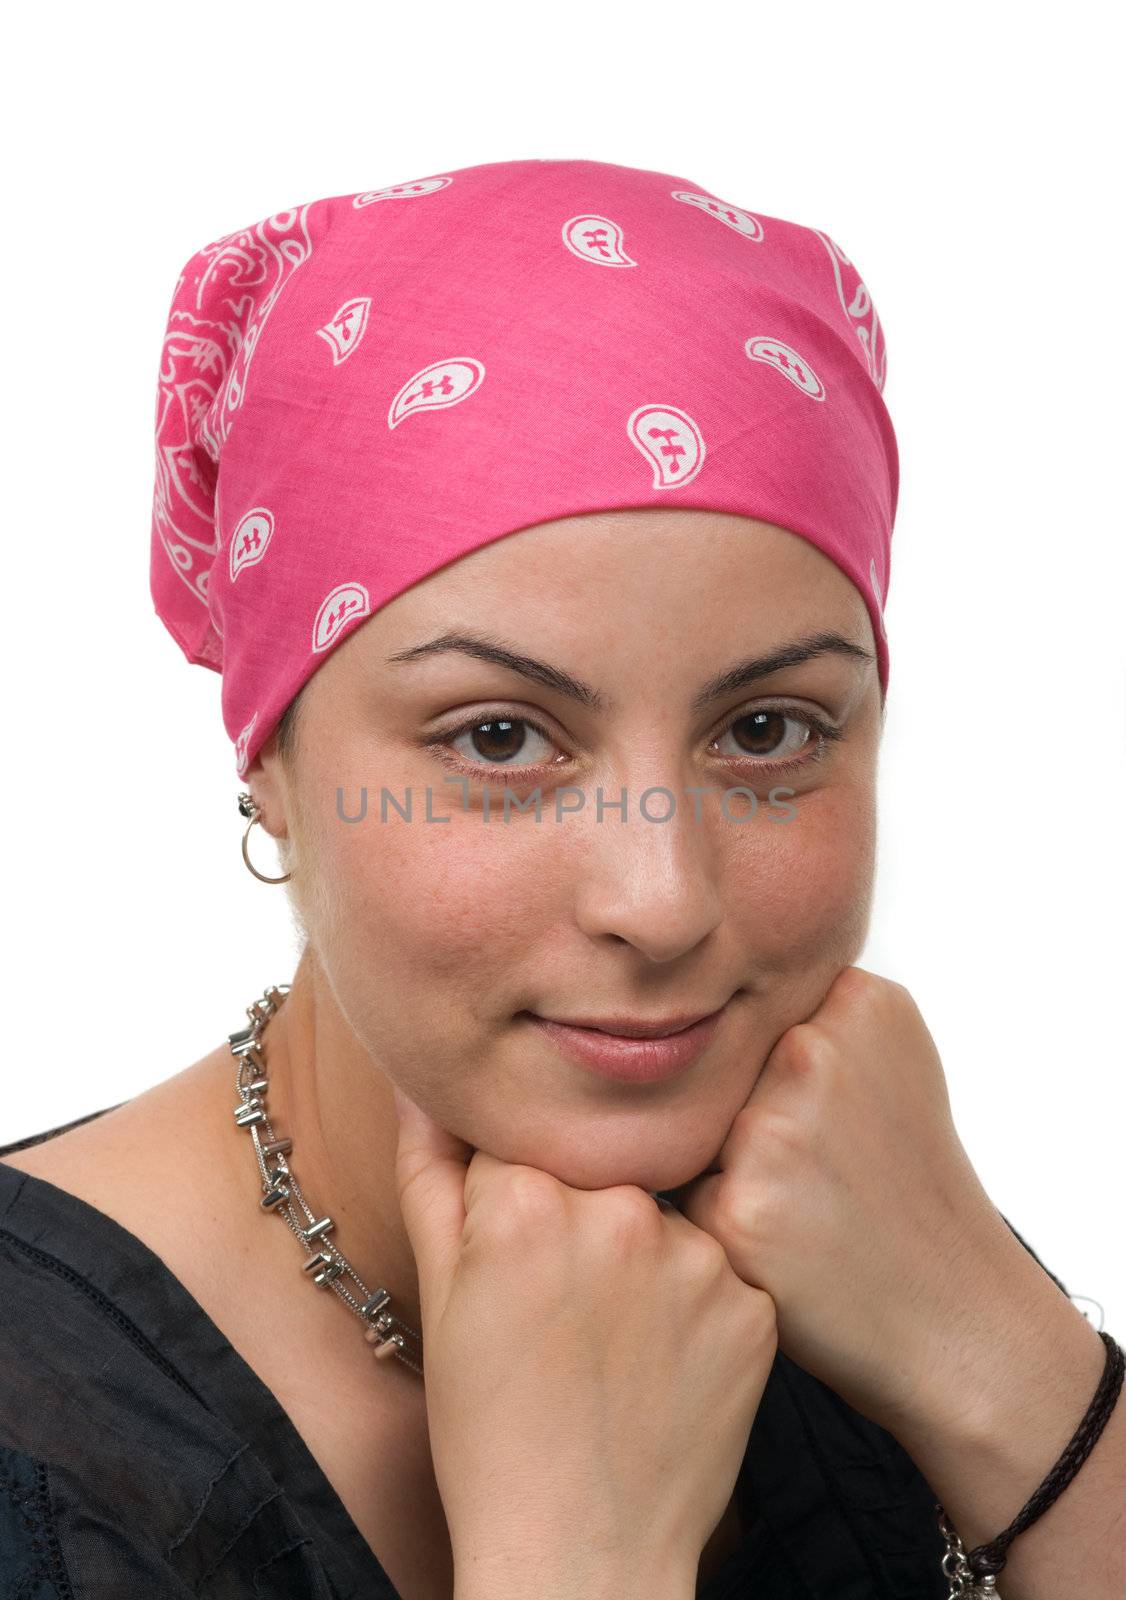 Beautiful breast cancer survivor with bandanna ( 2 months after chemo)
